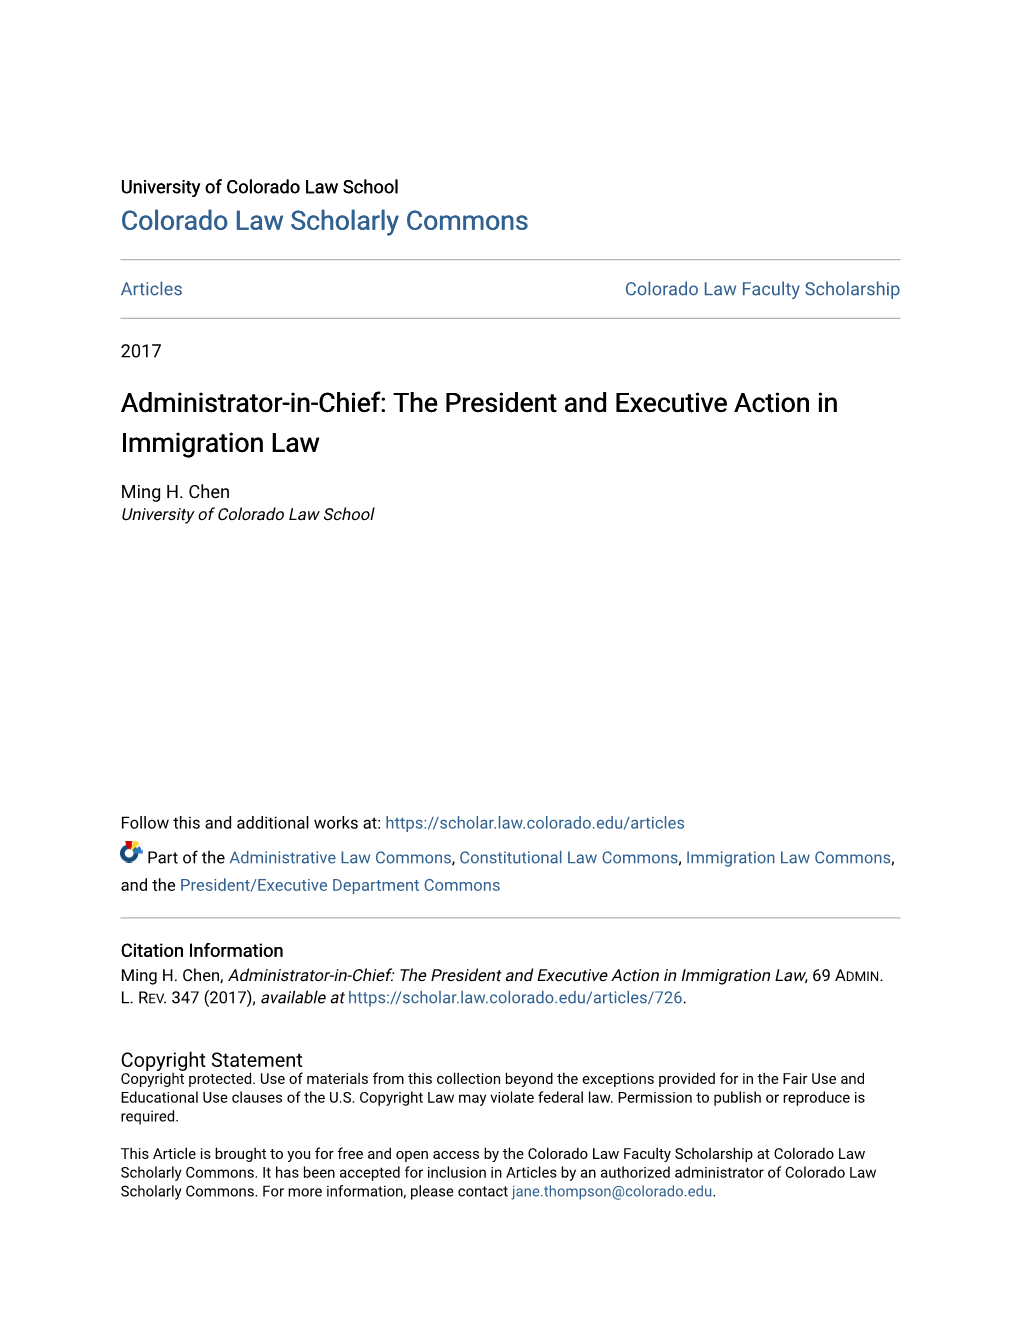 Administrator-In-Chief: the President and Executive Action in Immigration Law